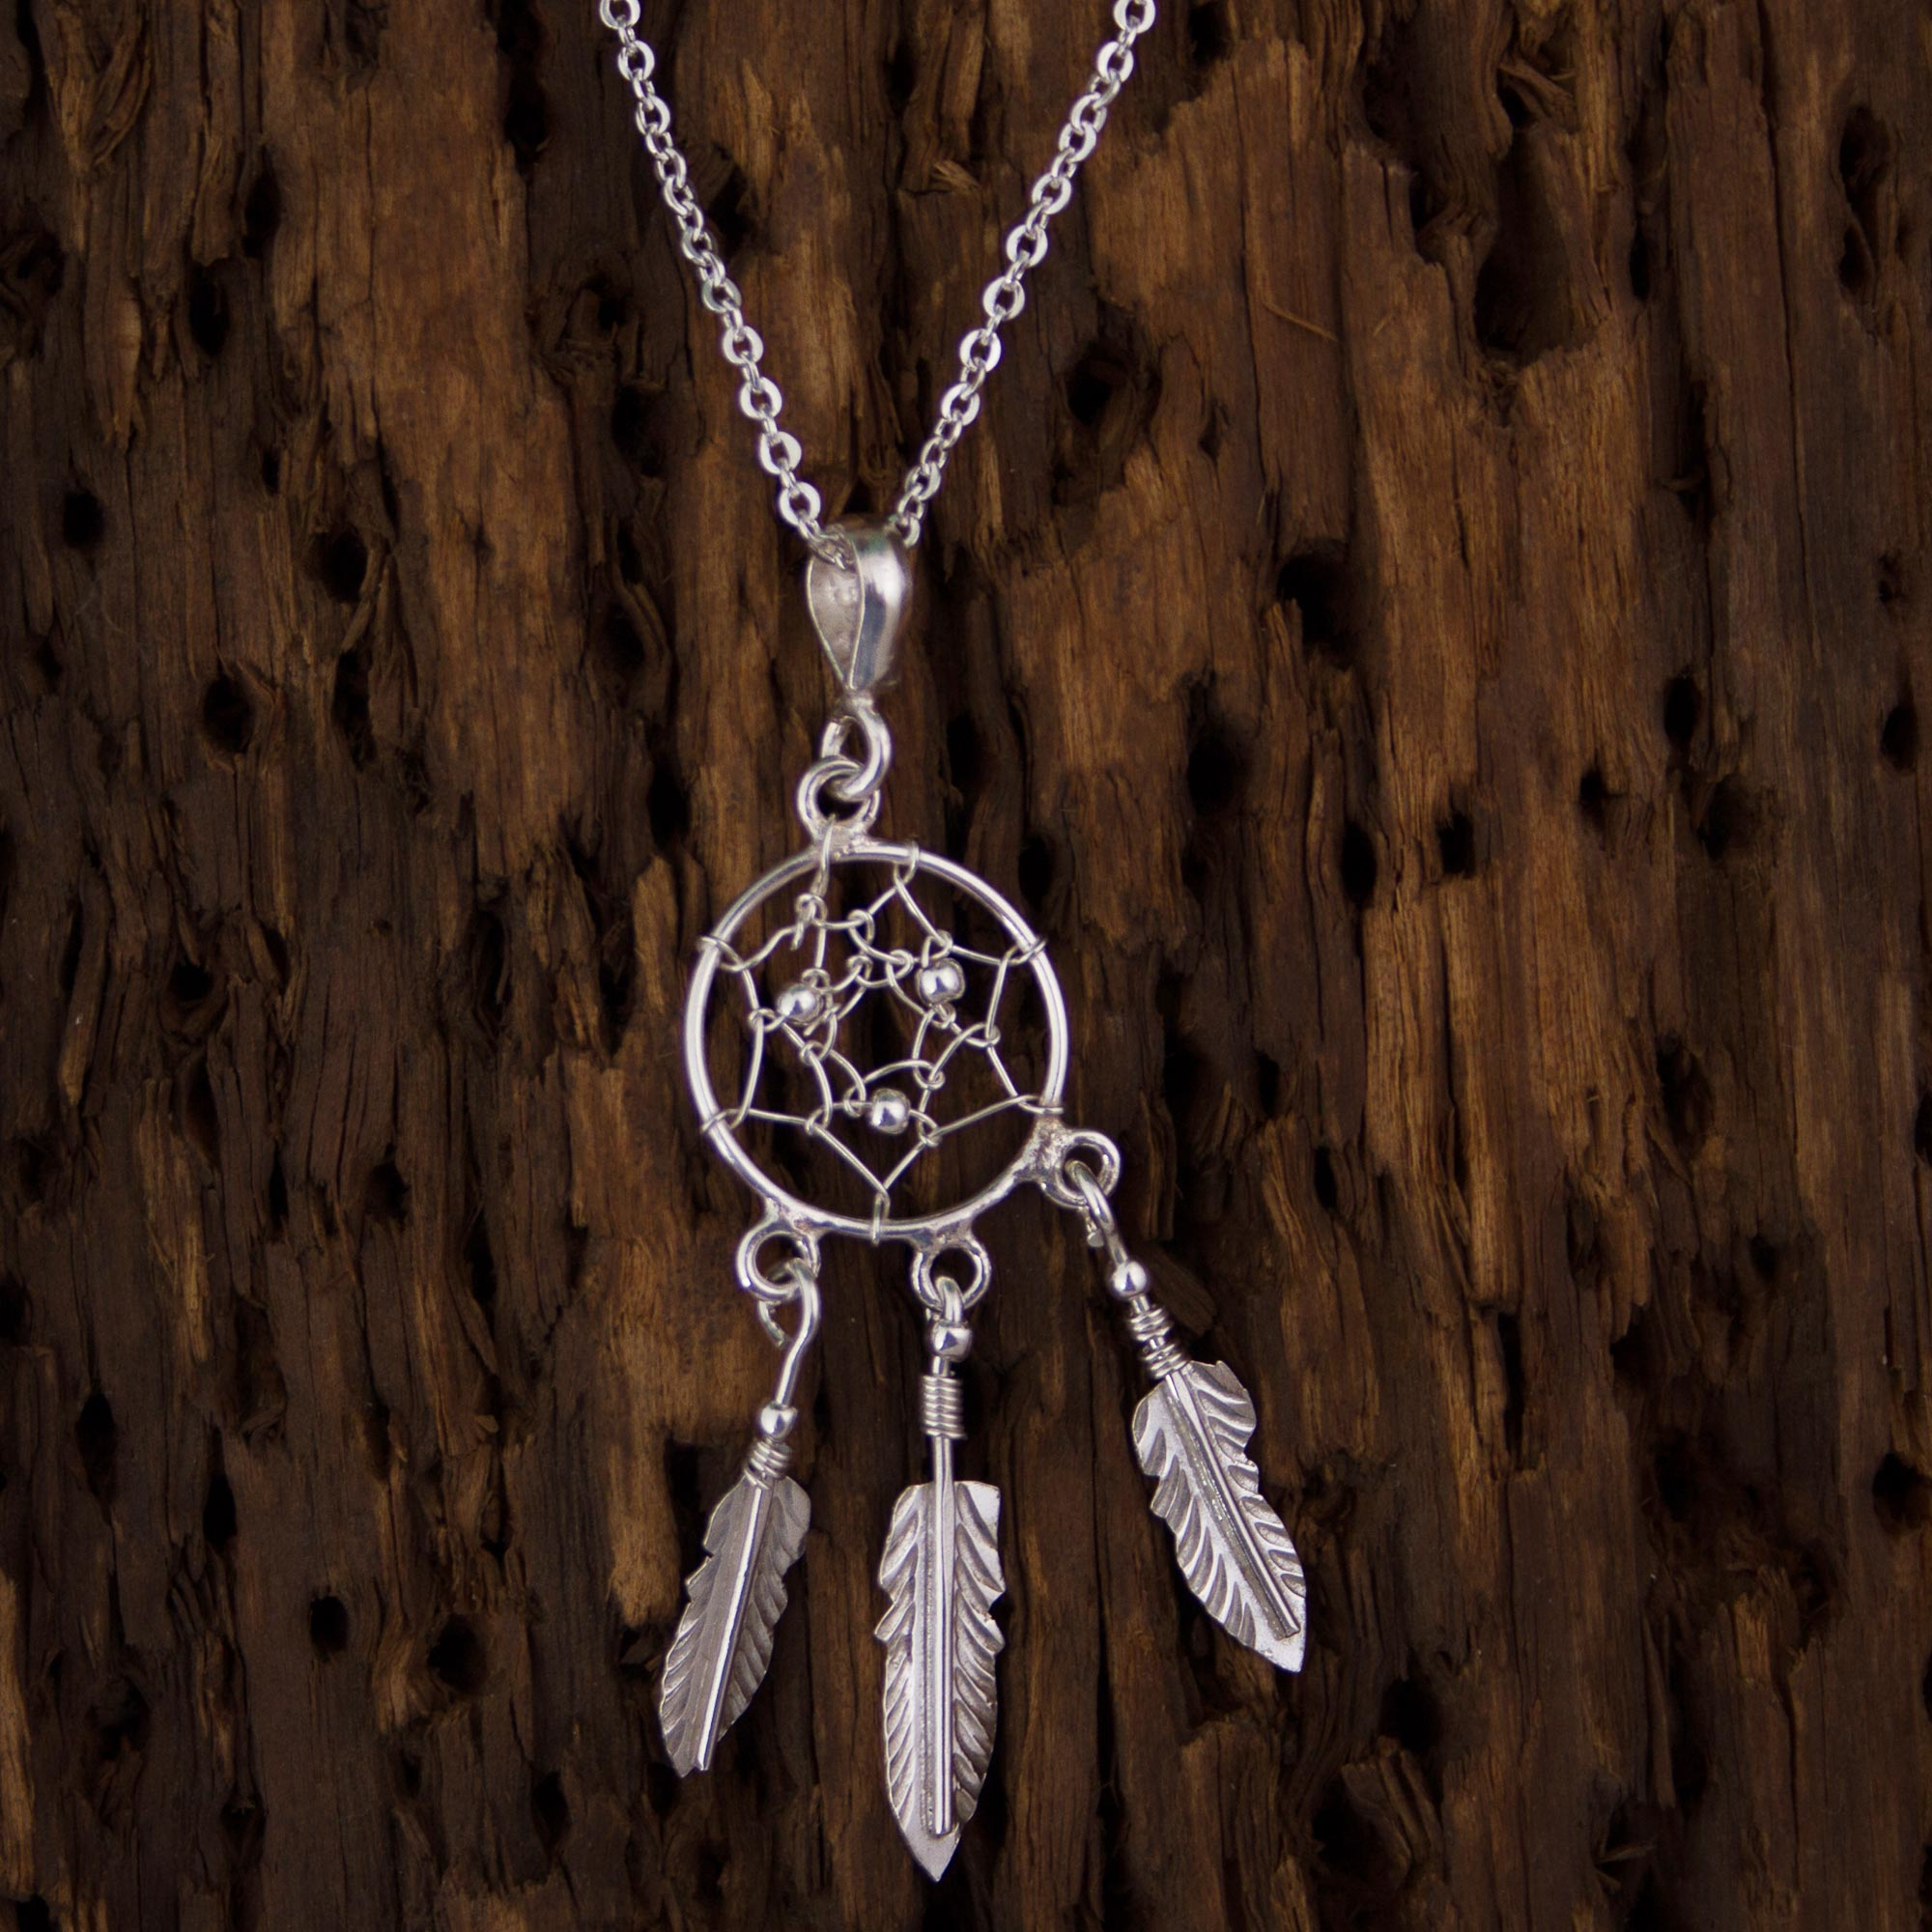 Sterling Silver Dream catcher necklace